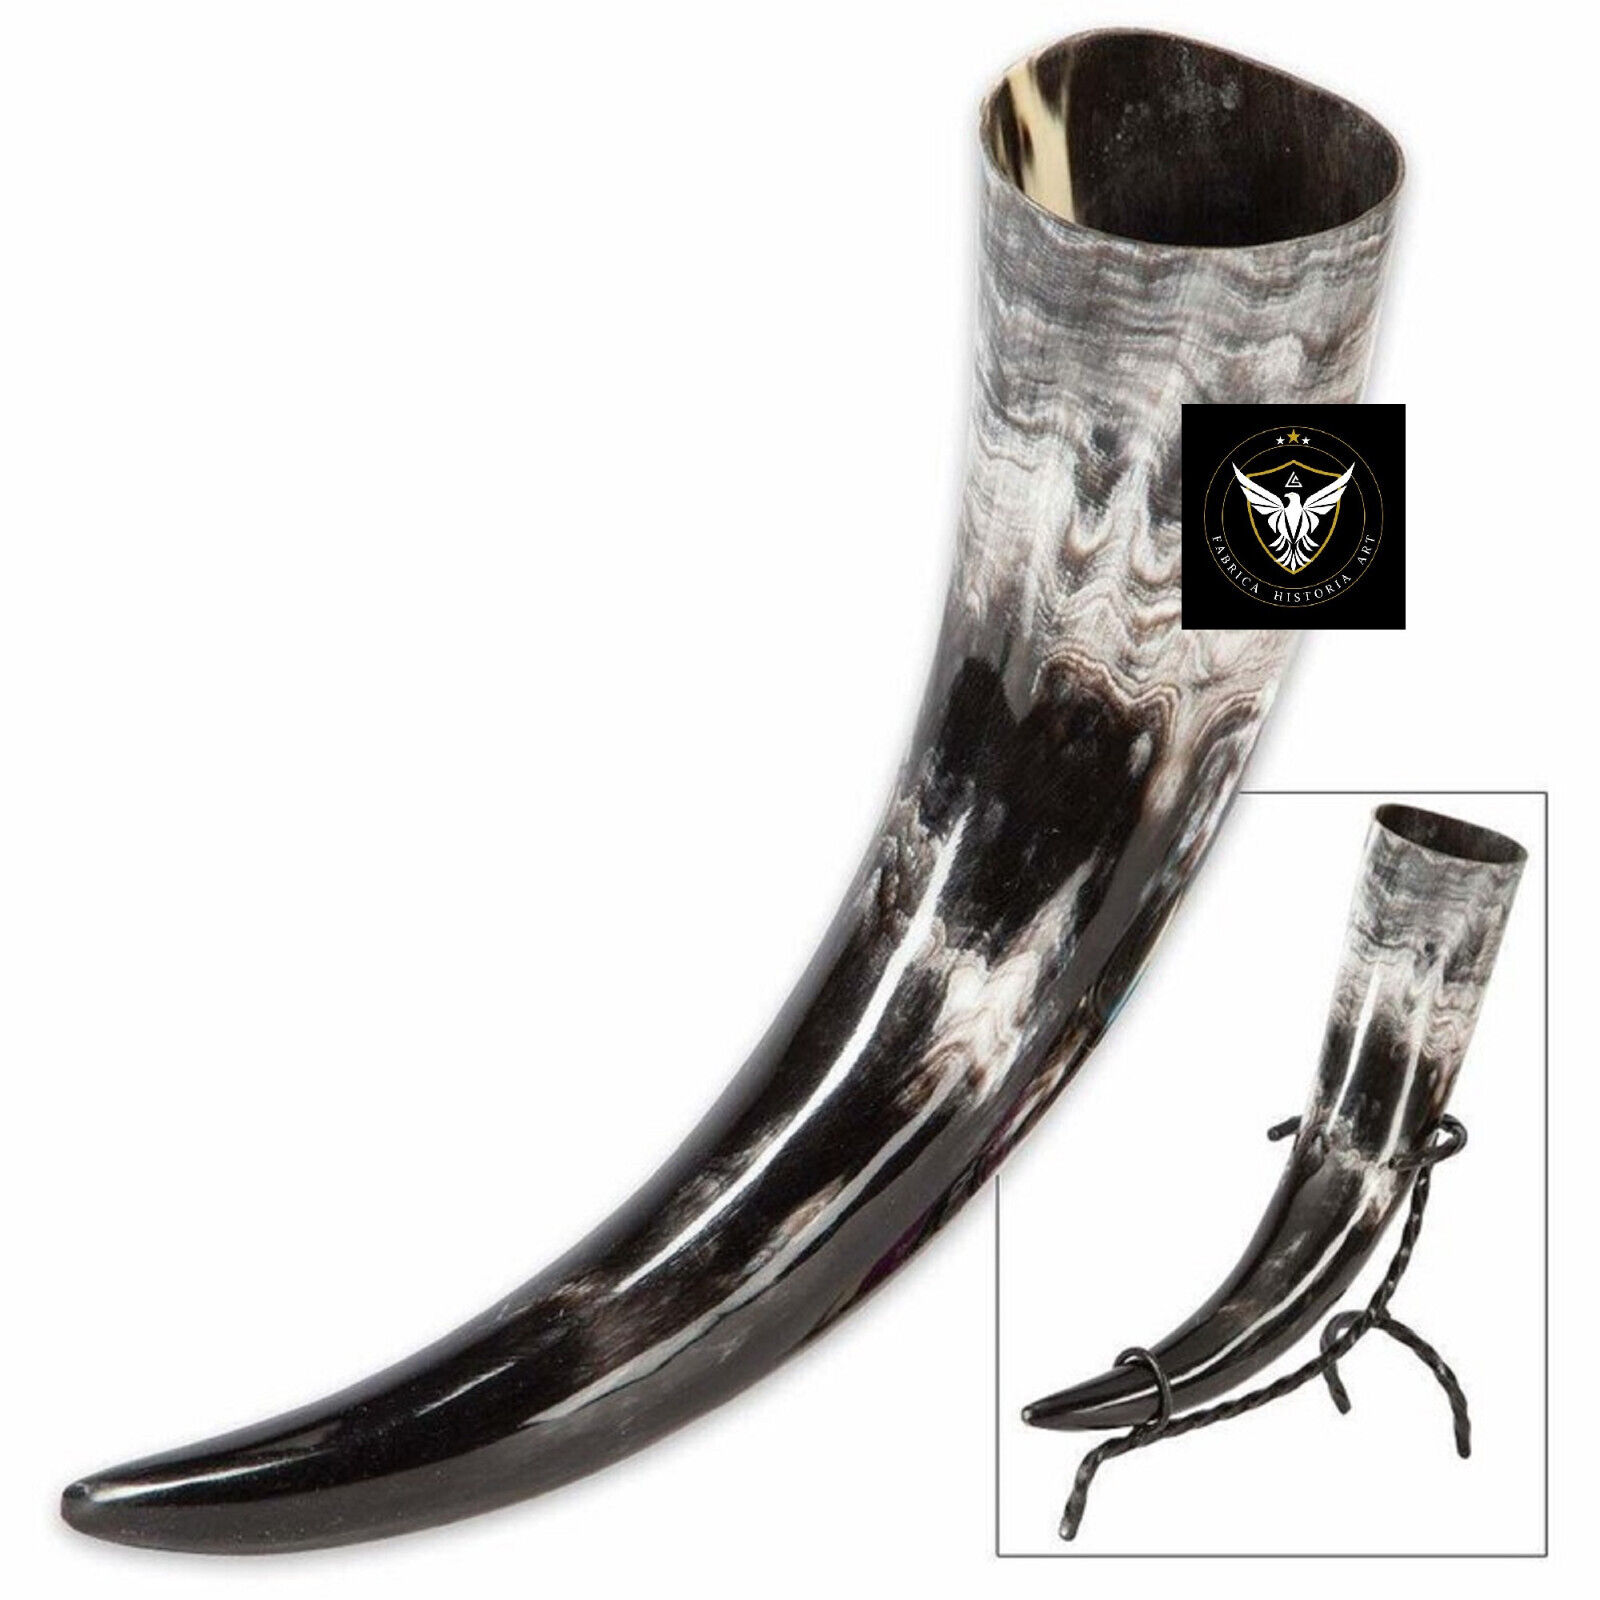 Vintage Drinking Horn Mug Medieval Handmade Viking Cup With Iron Stand